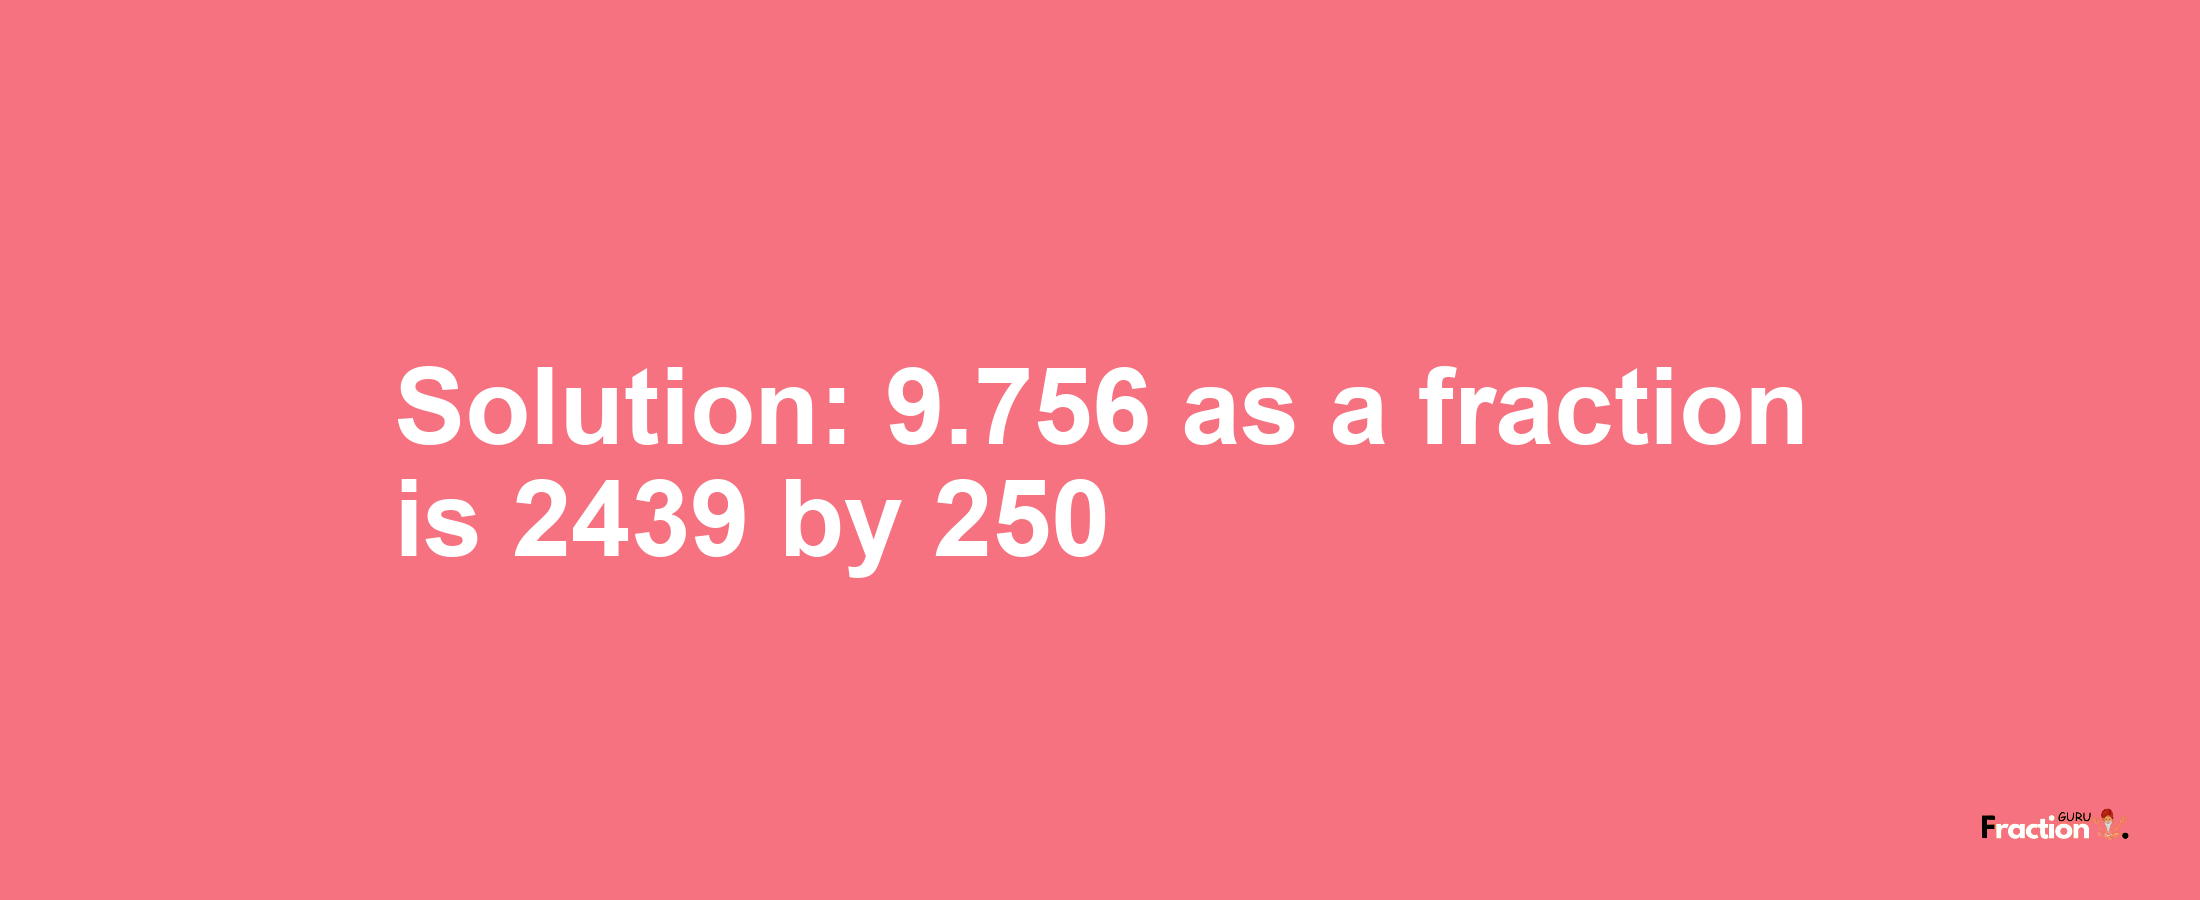 Solution:9.756 as a fraction is 2439/250